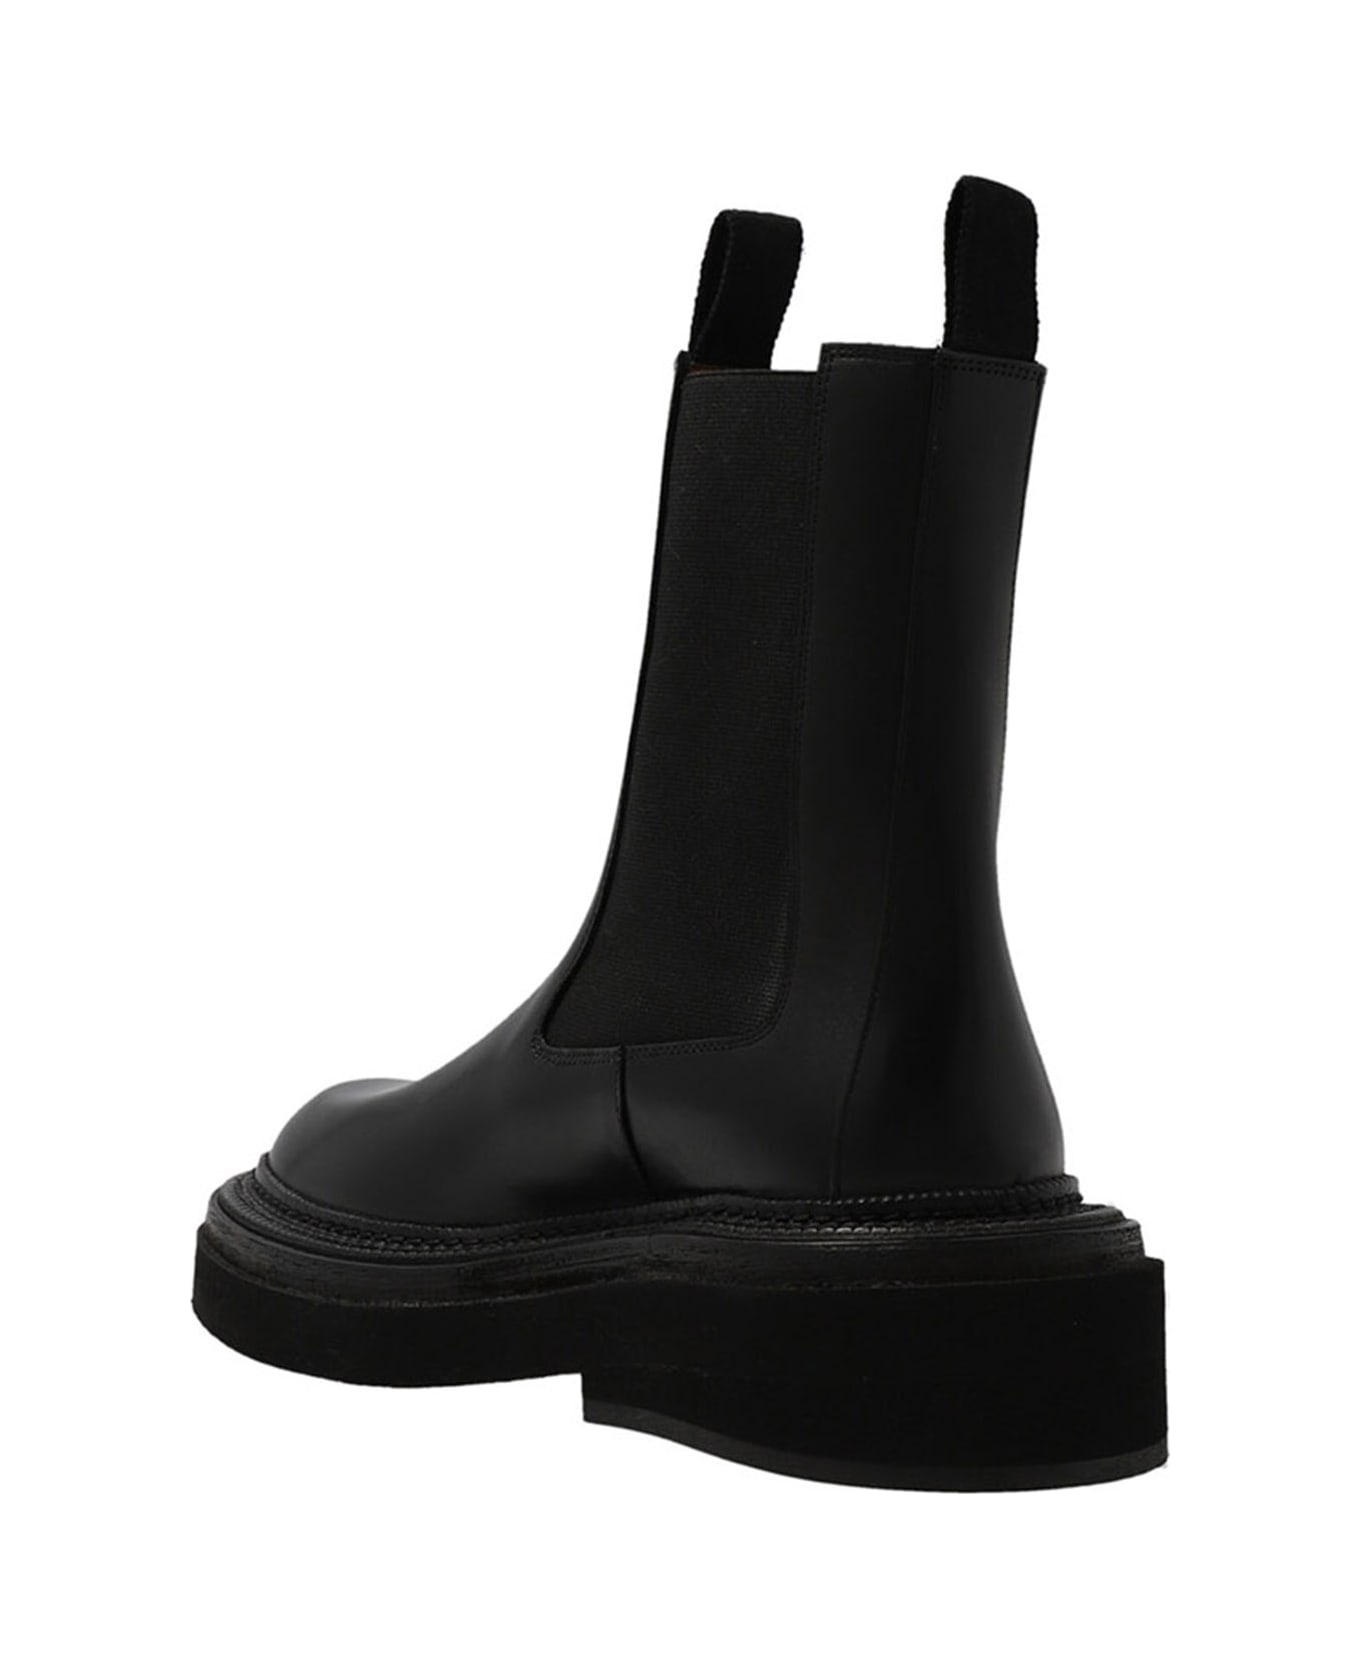 Marsell 'pollicione Beatles' Ankle Boots - Black  